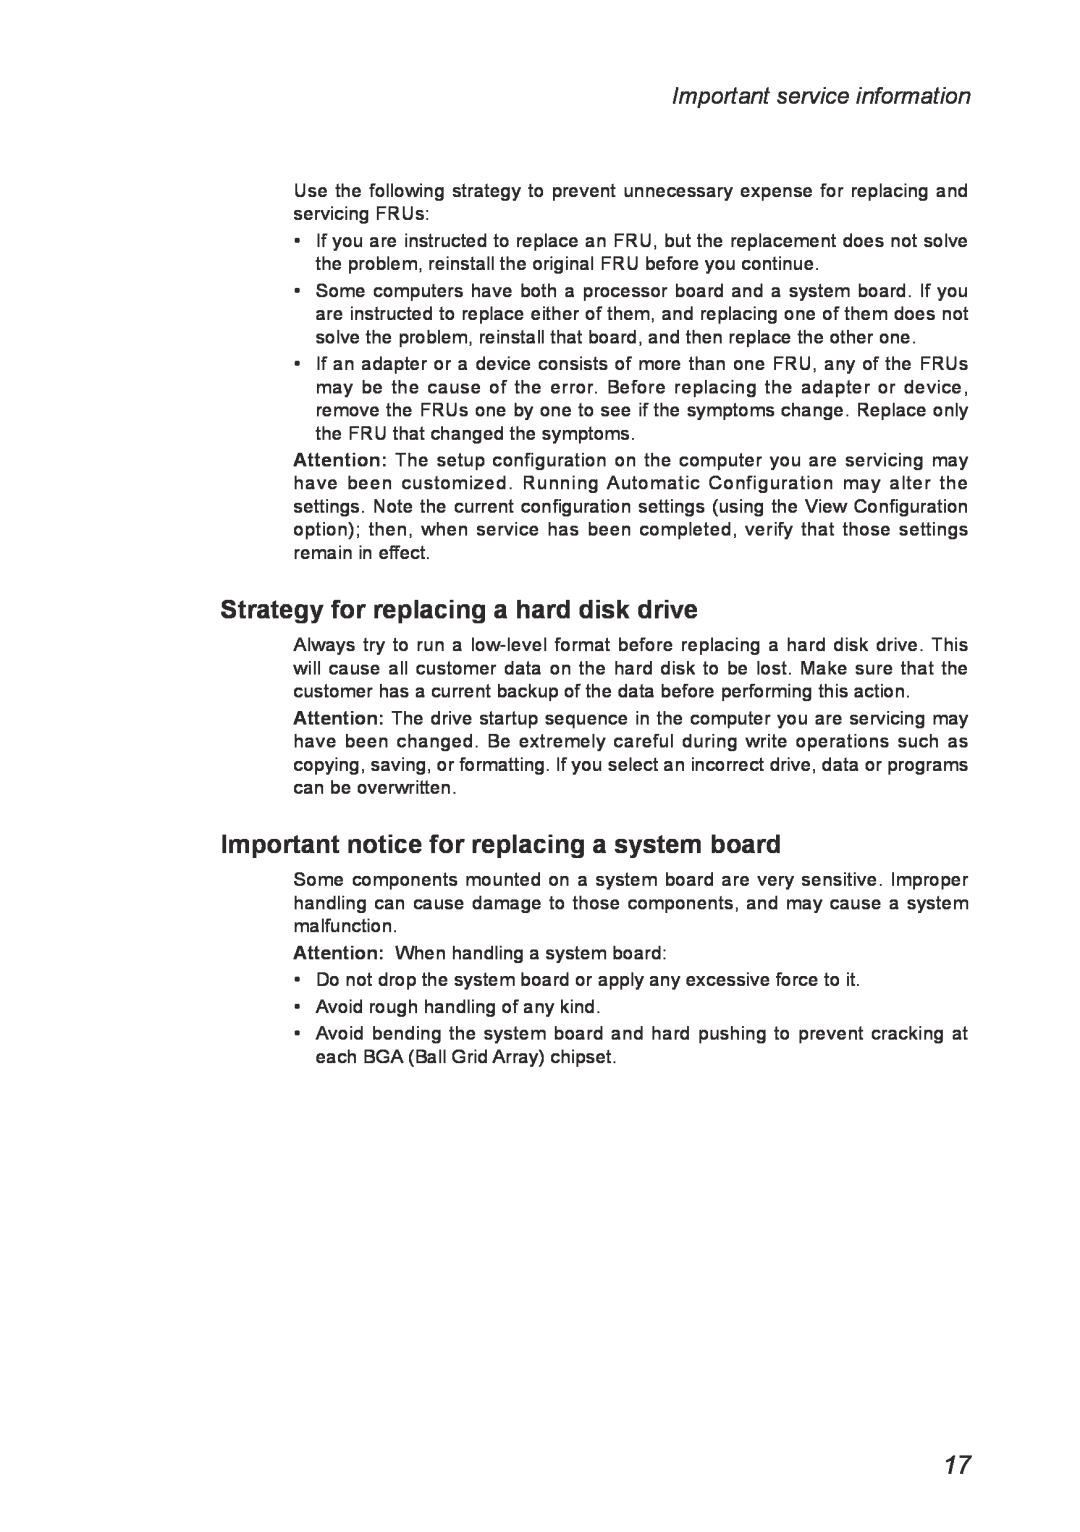 Lenovo U260 manual Strategy for replacing a hard disk drive, Important notice for replacing a system board 